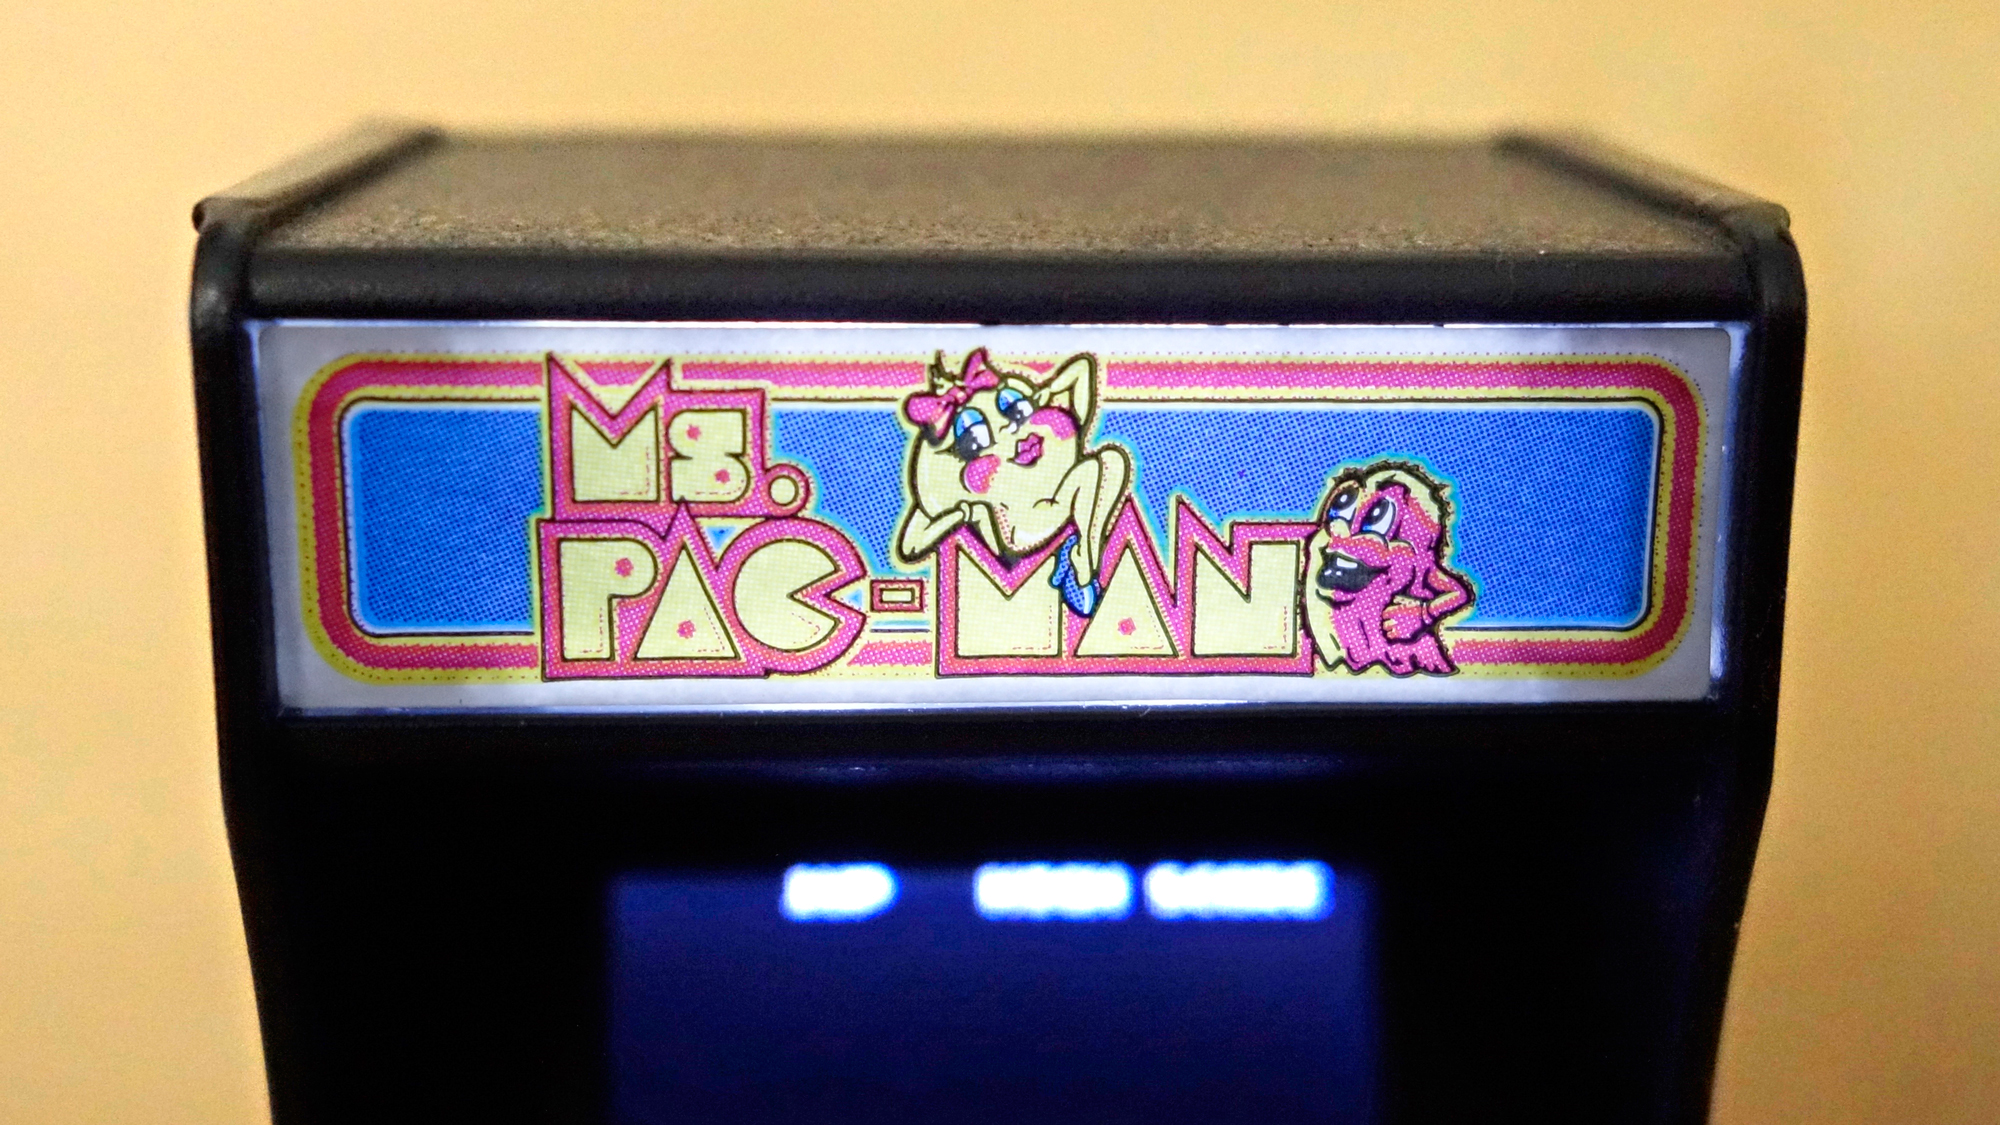 Eye Strain Is A Small Price To Pay For Having My Own Tiny Video Game Arcade